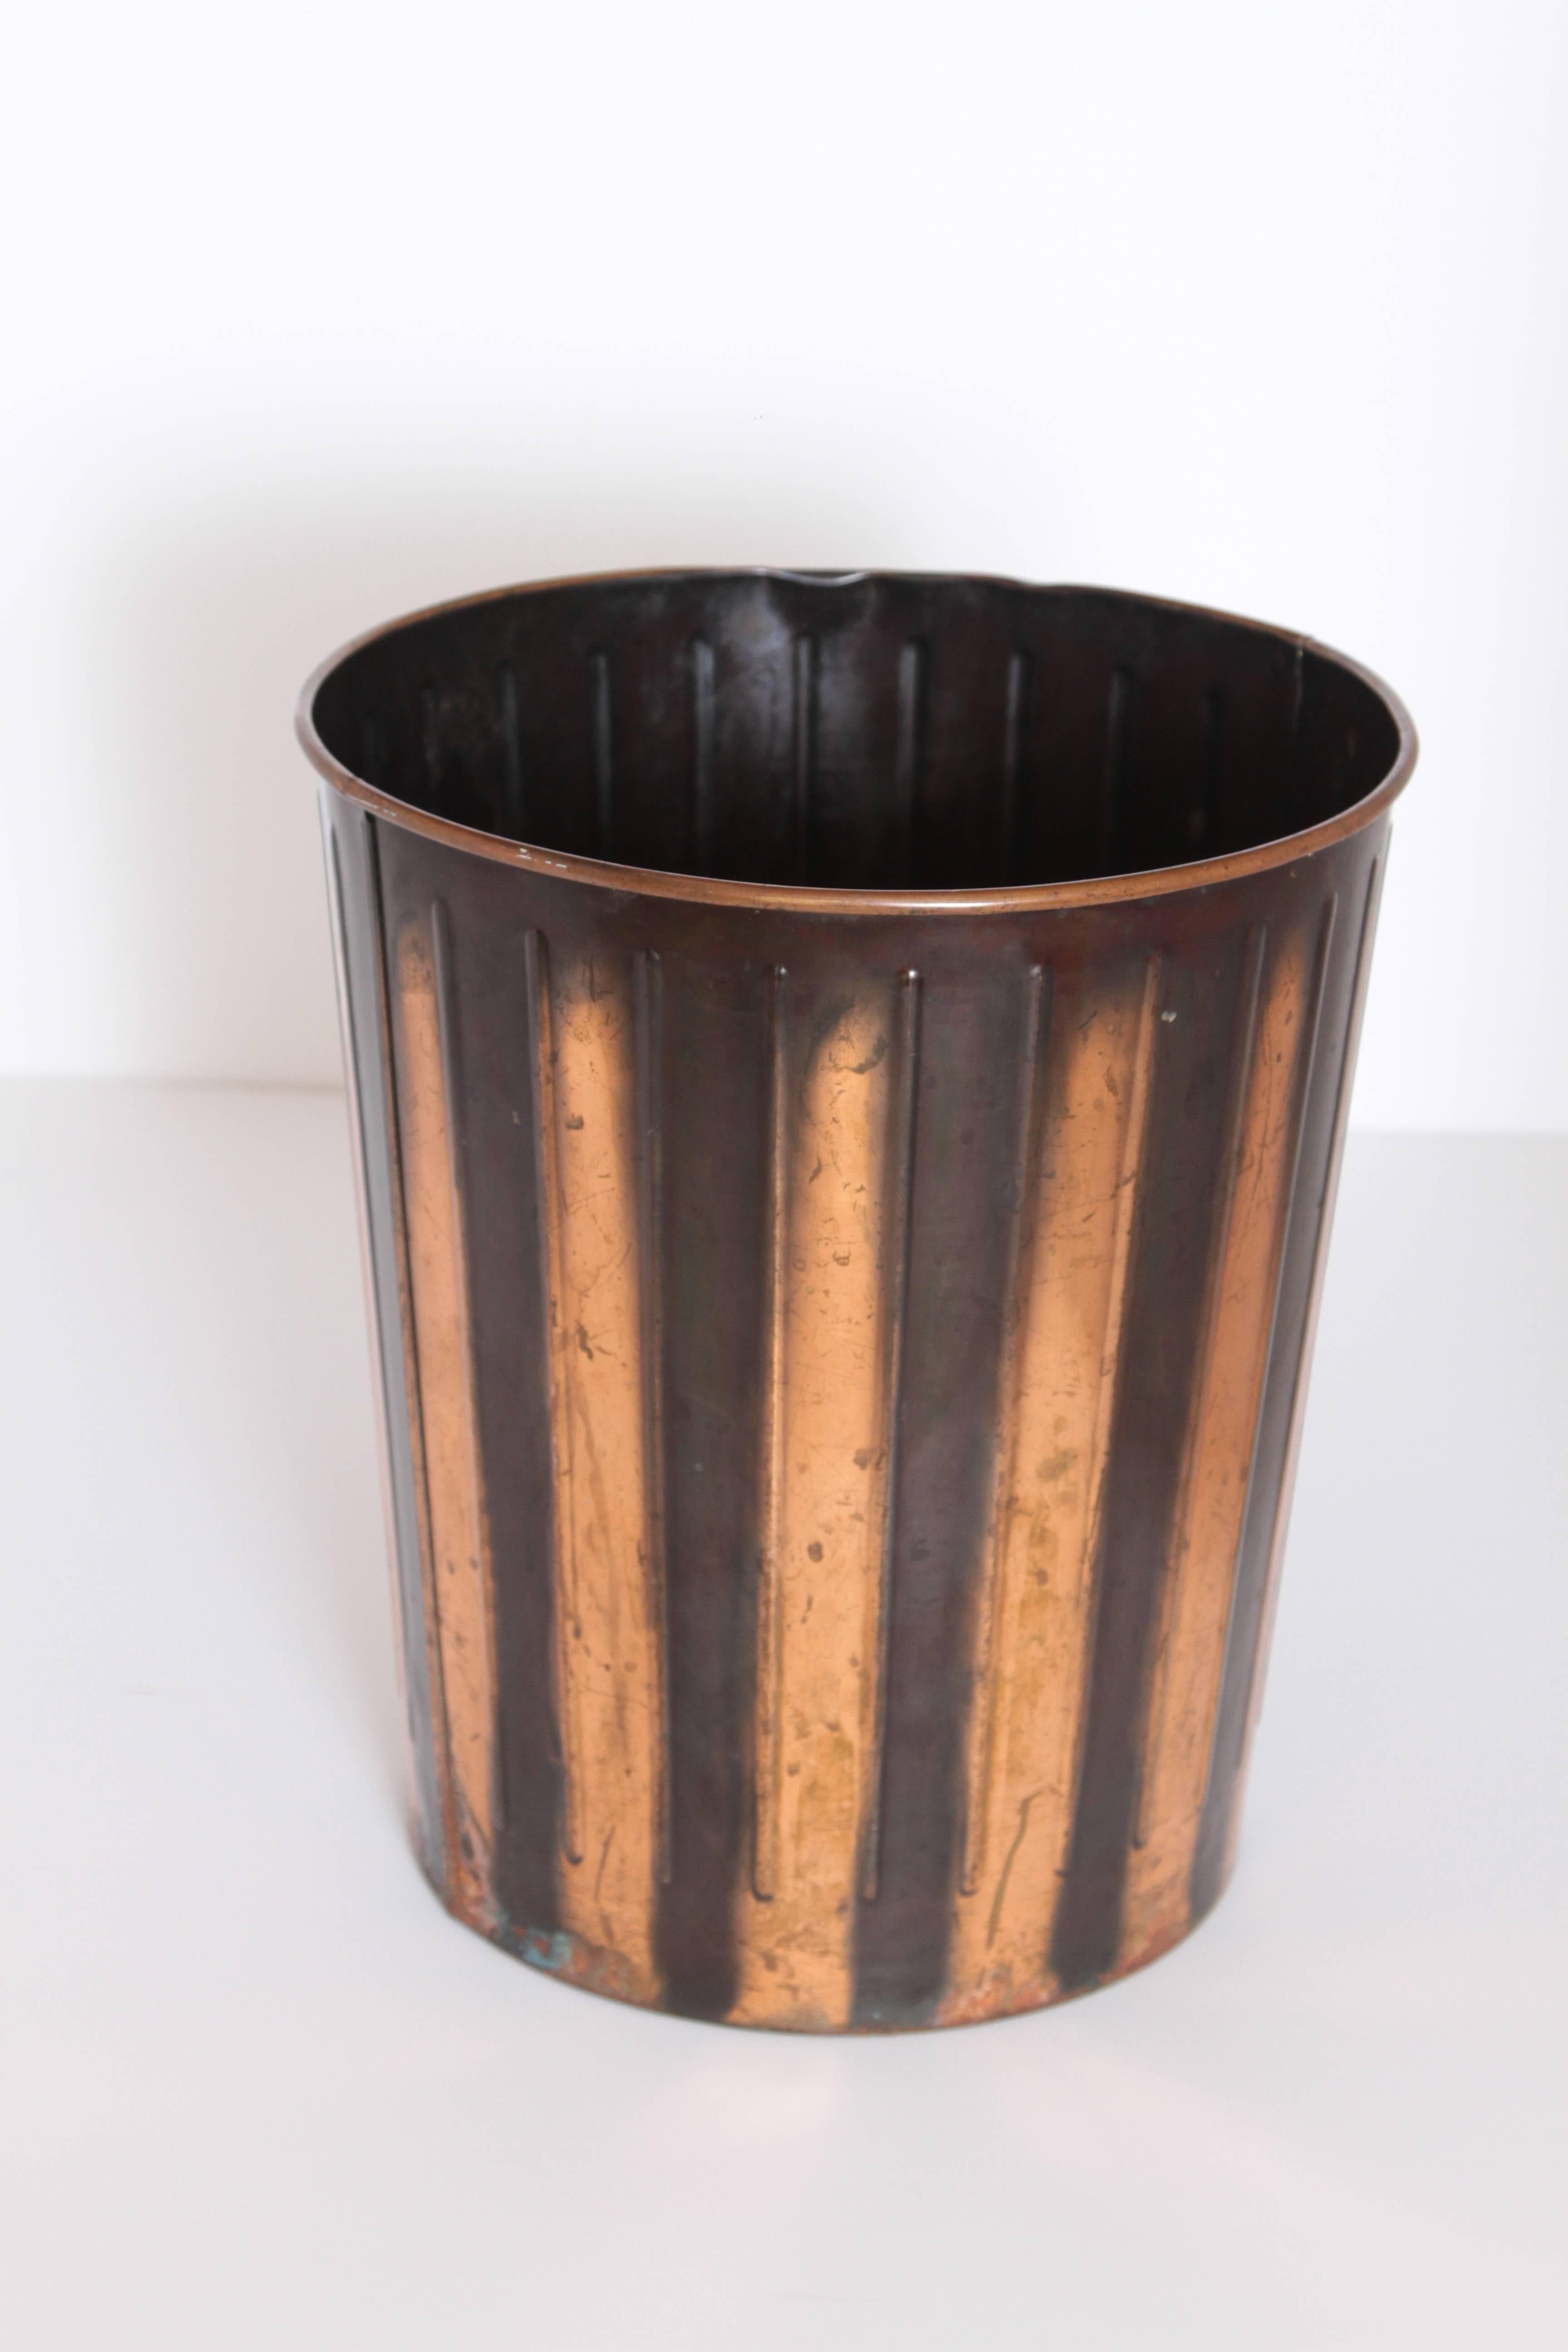 Machine Age Art Deco Industrial Arts Waste Receptacle by Erie Art Metal

Fabulous rolled-metal and ribbed construction, with excellent Japanned copper and black finish.
This is the classic DAN-DEE version #12 by Erie Artmetal Co.  Rare